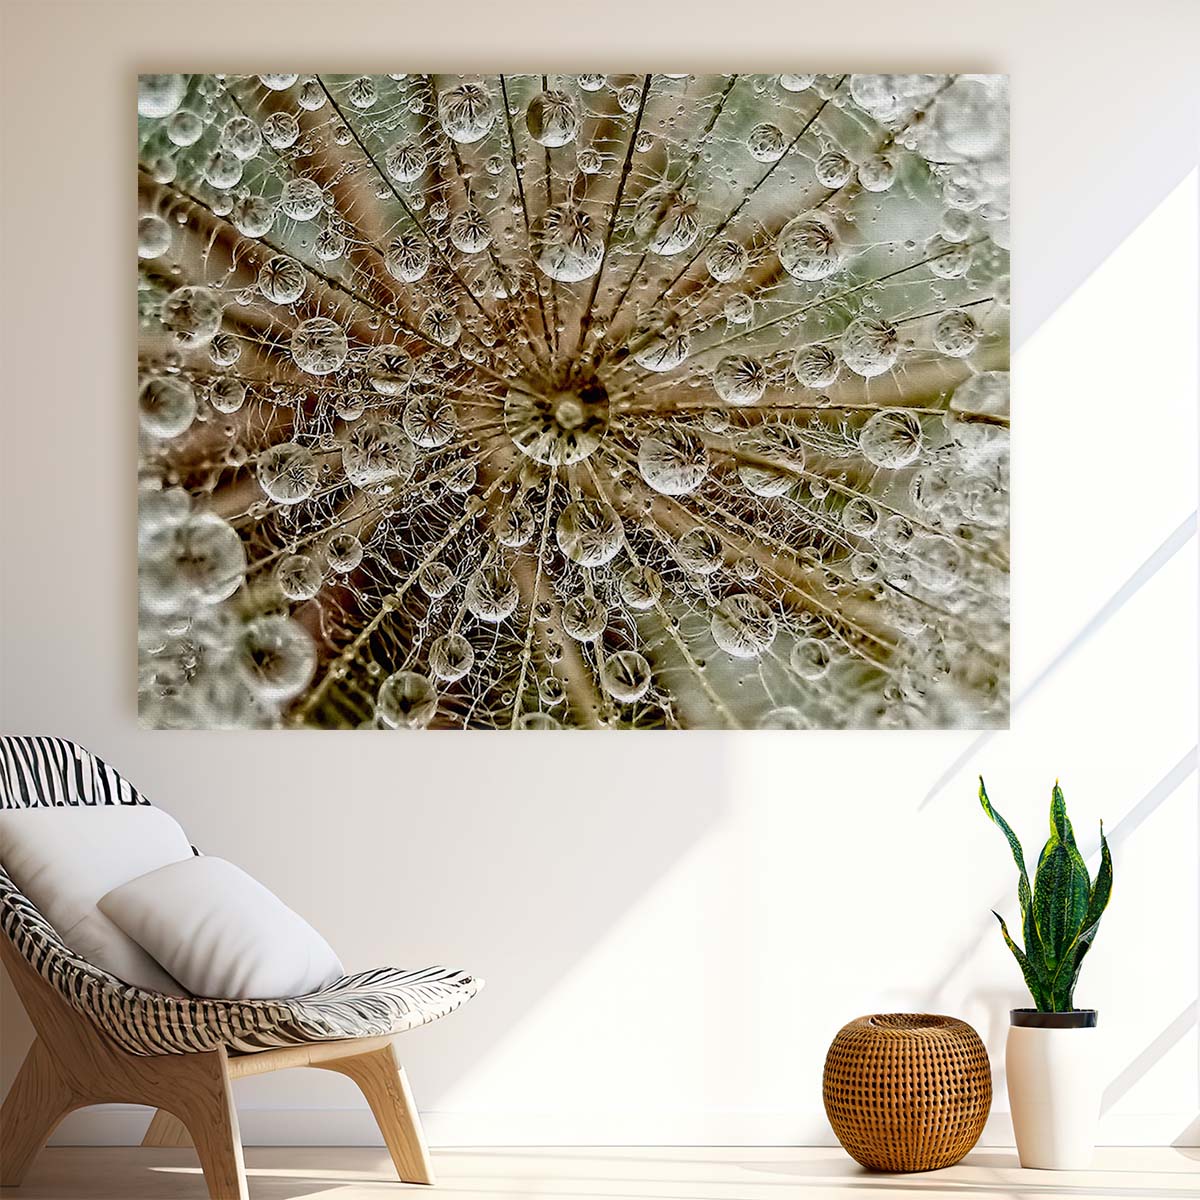 Autumn Dew & Pearl Droplets Floral Macro Wall Art by Luxuriance Designs. Made in USA.